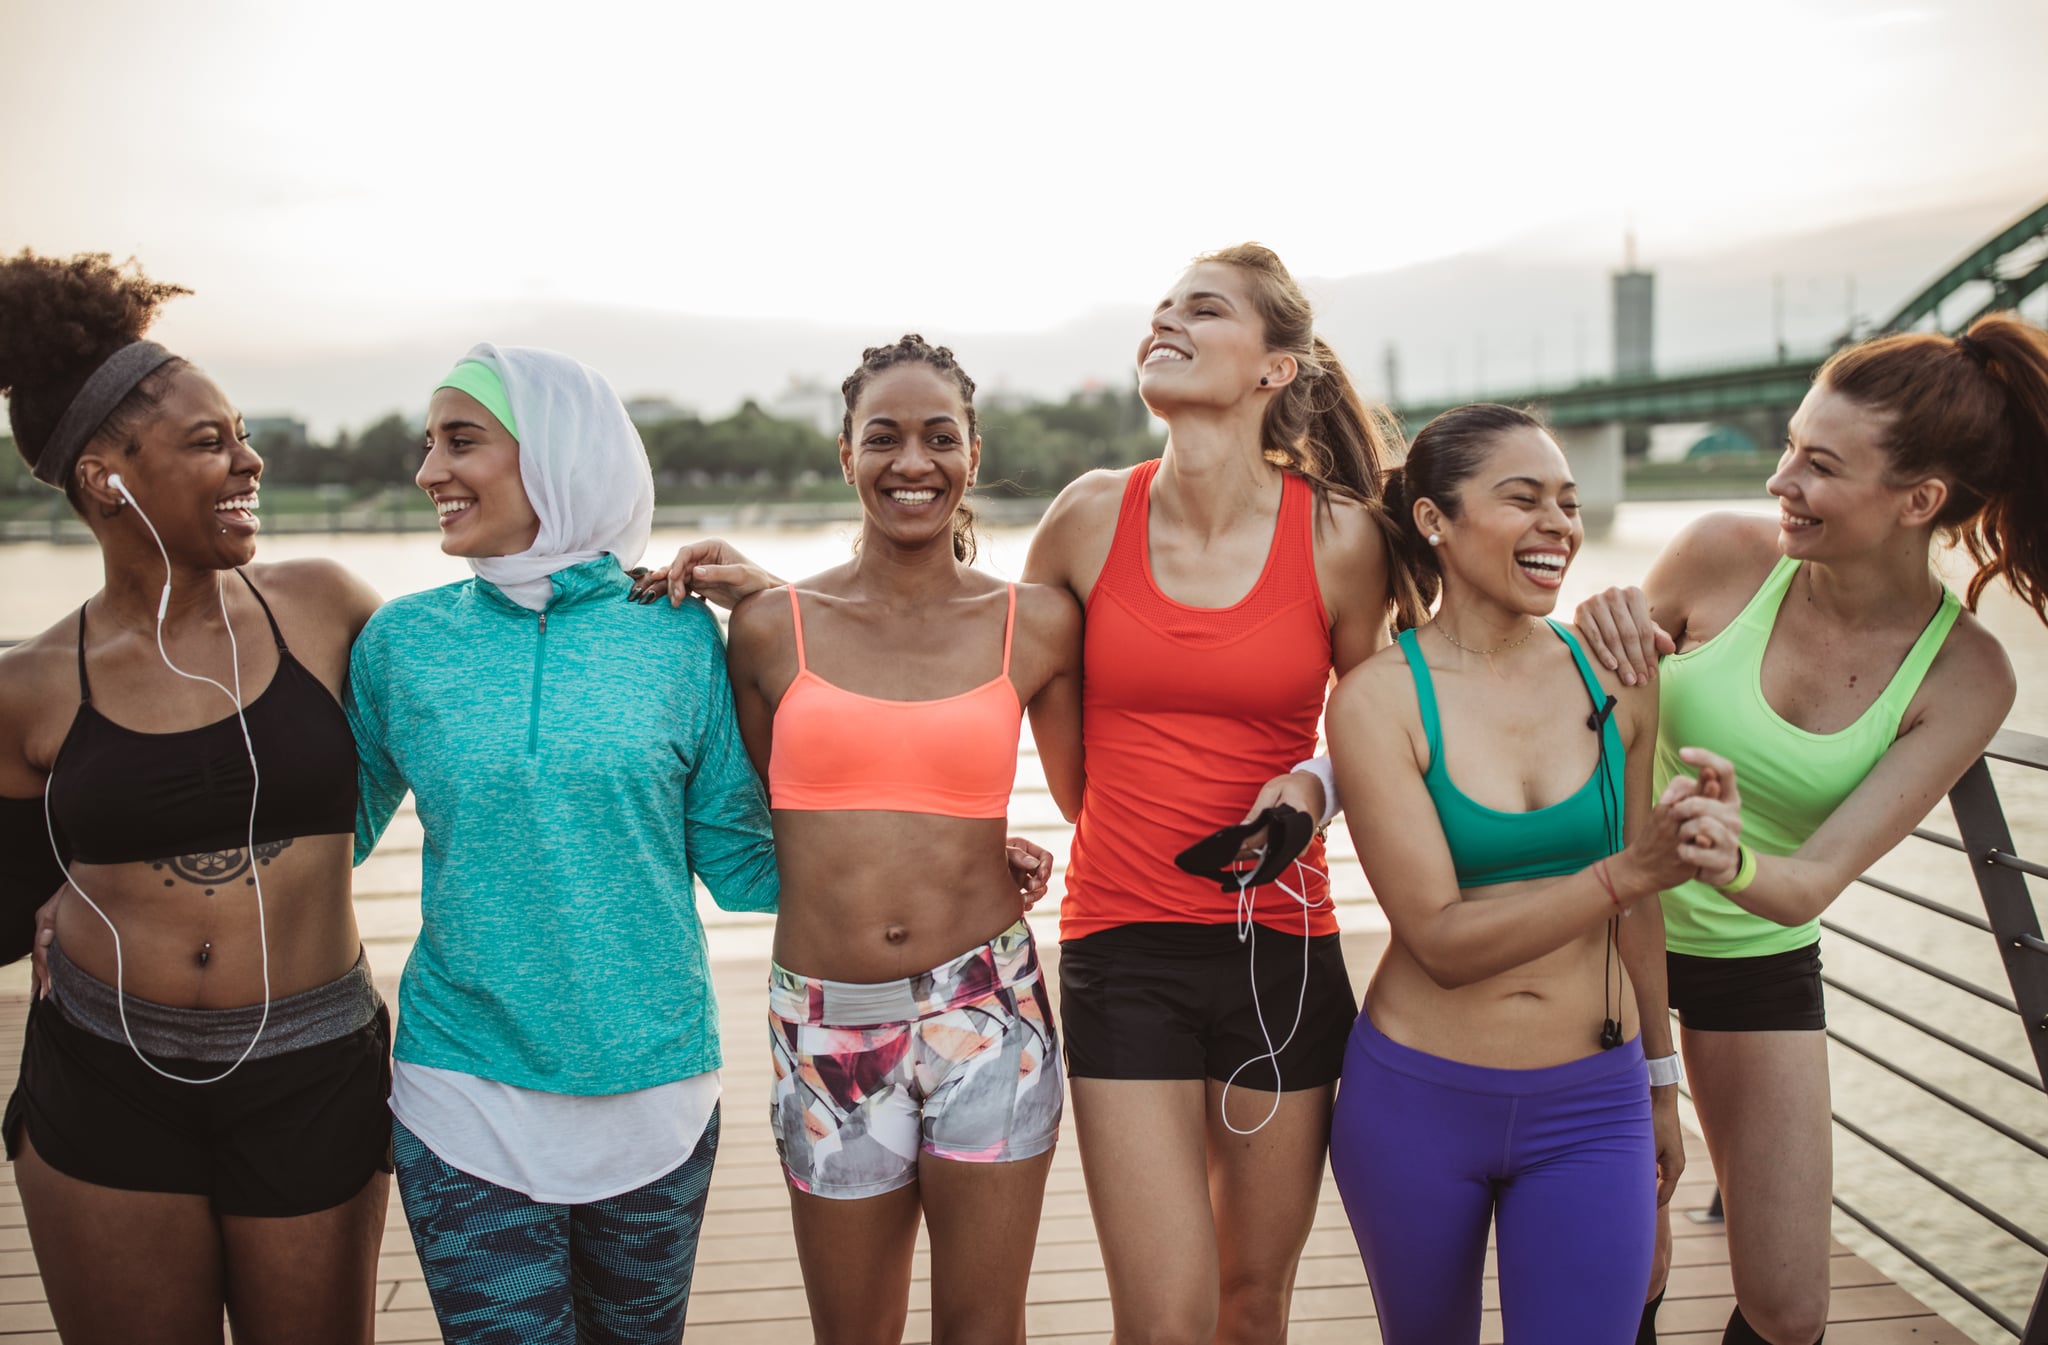 Multi ethnic group of young  women exercise outdoor, next to the river. They are wearing sport clothing, running, stretching, celebrate and support each other.